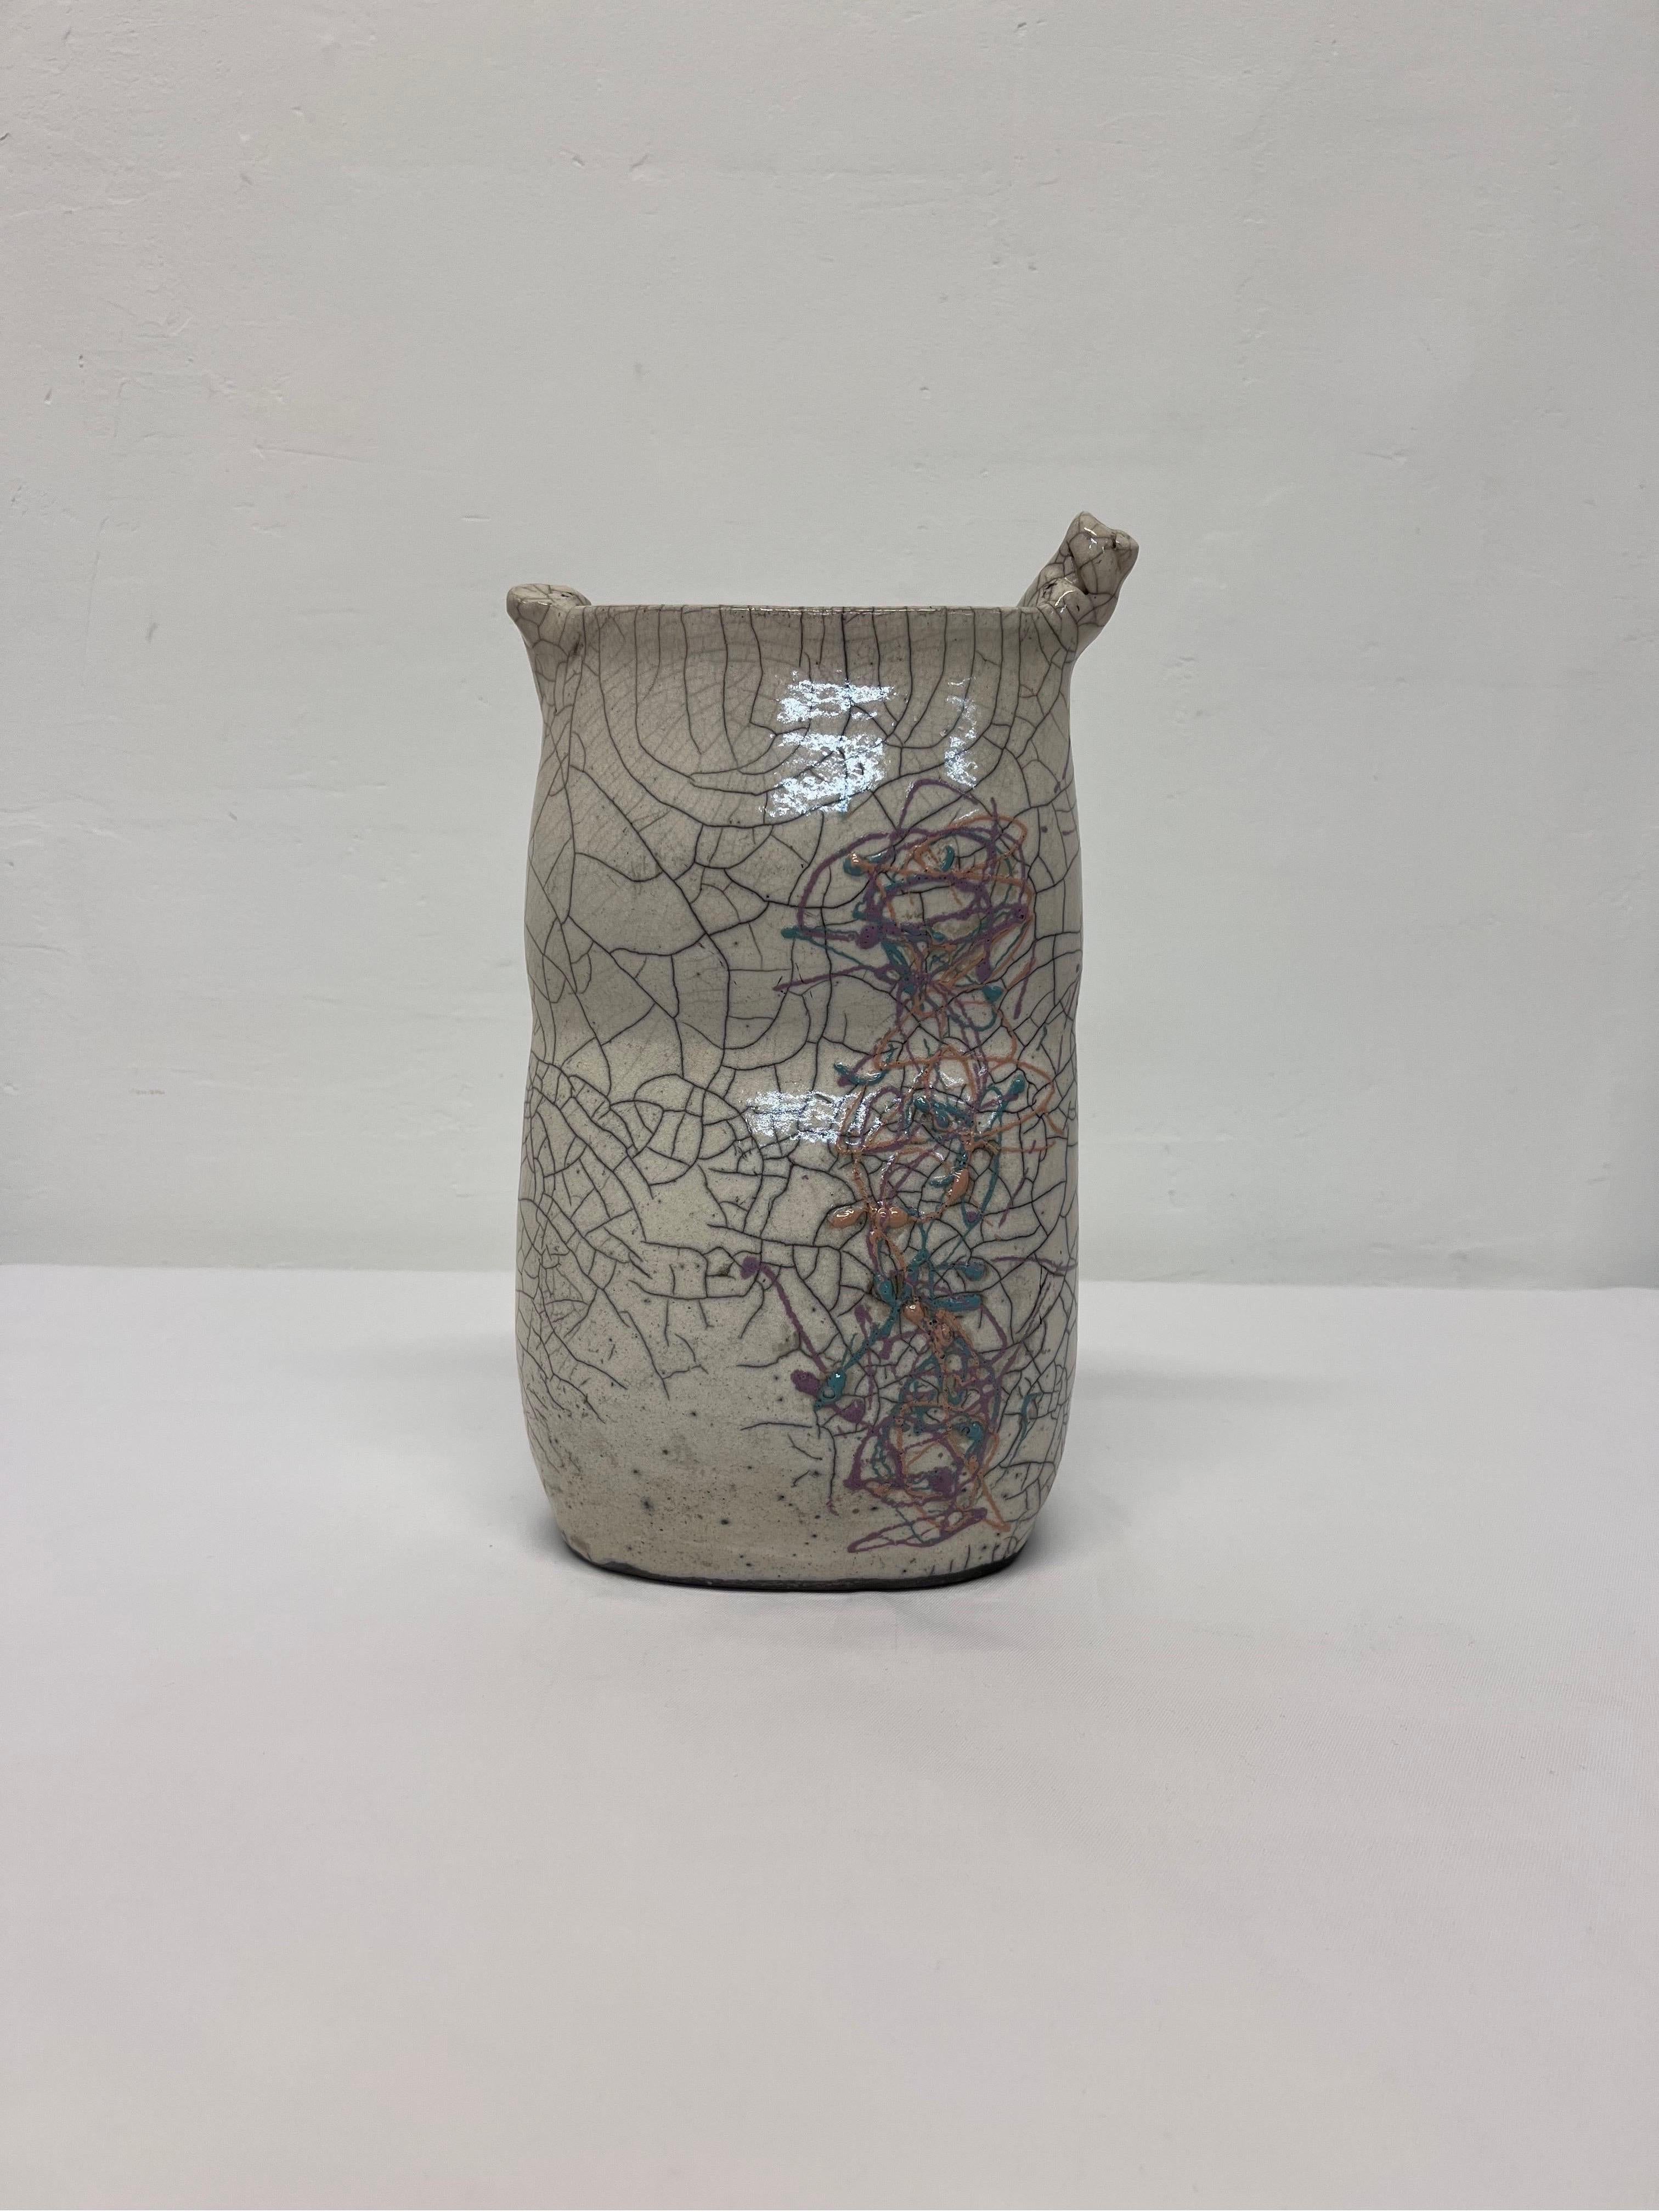 Clay Postmodern Crackled Glaze Studio Pottery Vase with Colorful Design, 1980s For Sale